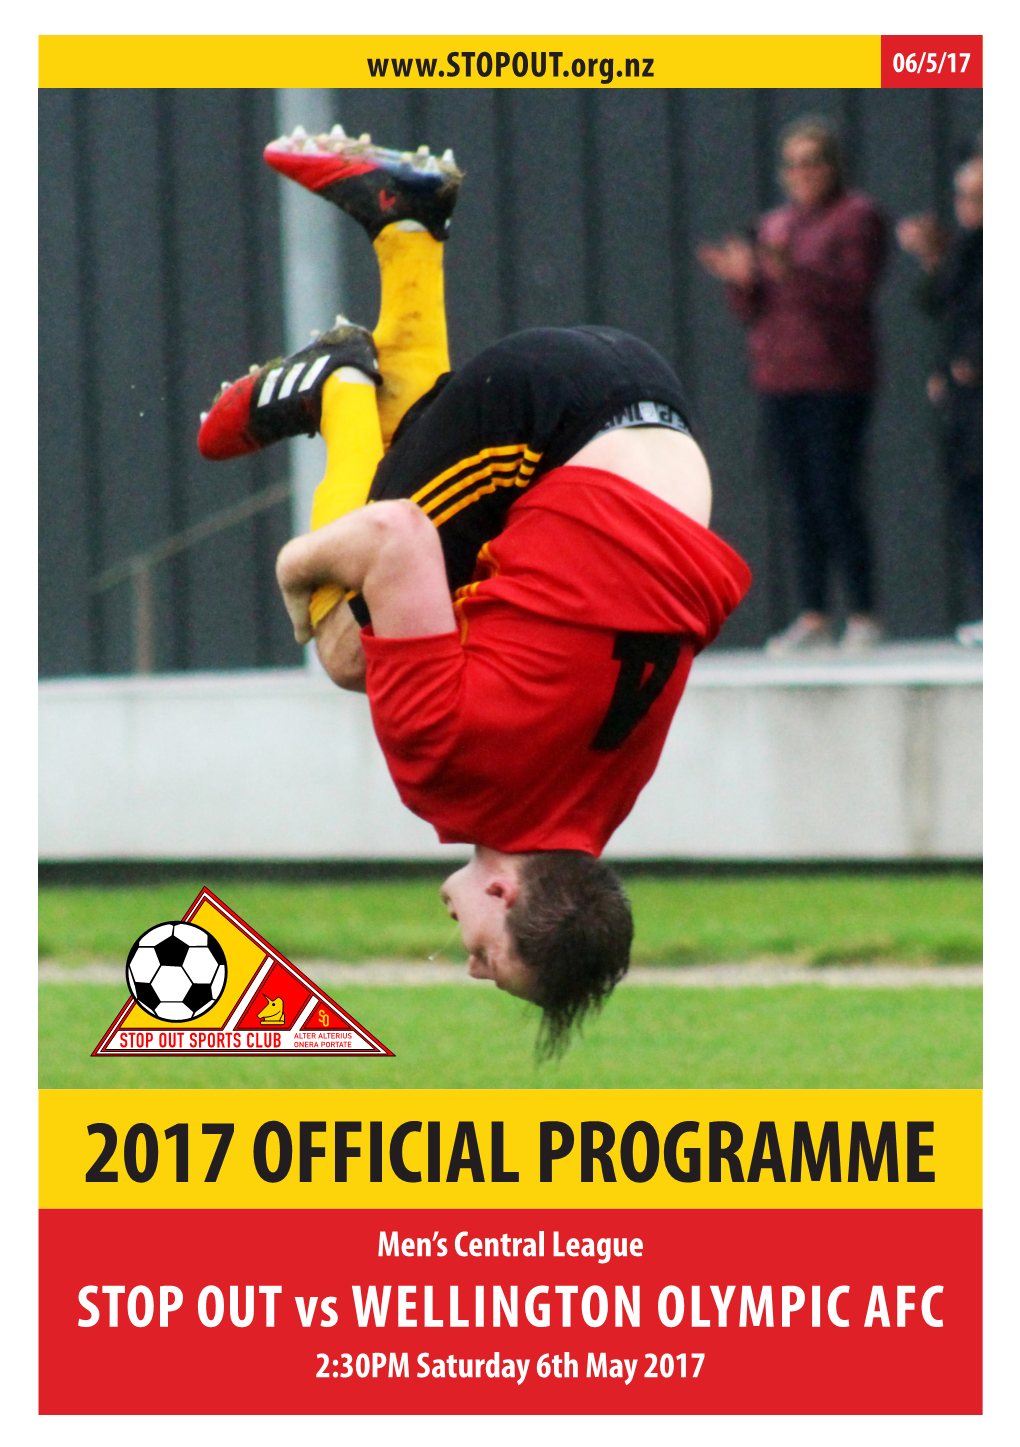 2017 OFFICIAL PROGRAMME Men’S Central League STOP out Vs WELLINGTON OLYMPIC AFC 2:30PM Saturday 6Th May 2017 FOOTBALL for ALL